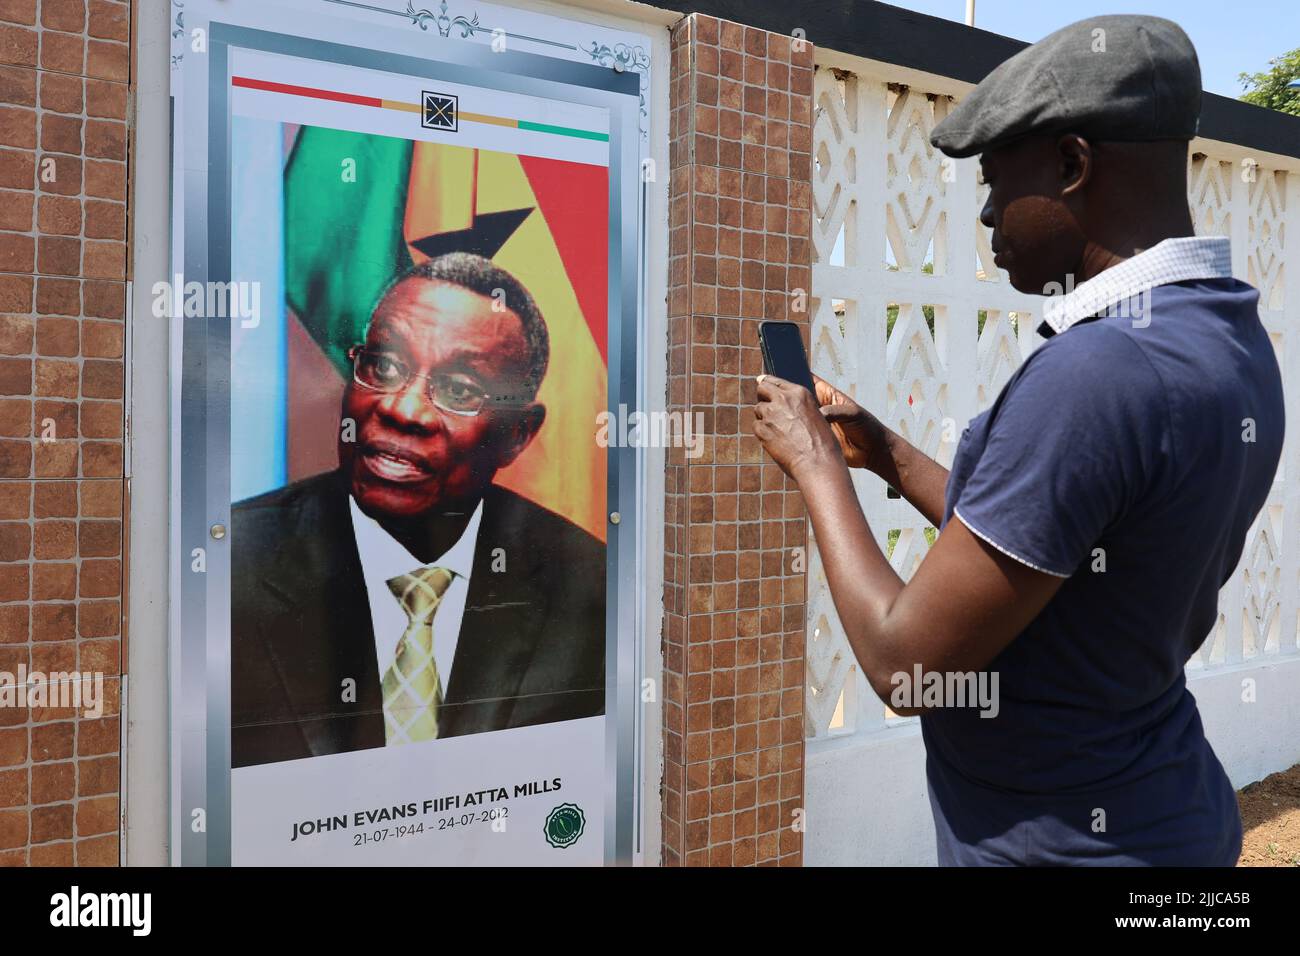 (220725) -- ACCRA, July 25, 2022 (Xinhua) -- A man takes a photo at a ceremony to commemorate the 10th anniversary of the death of former Ghanaian President John Evans Atta Mills in Accra, Ghana on July 24, 2022. Solemn ceremonies were held Sunday to commemorate the 10th anniversary of the death of former Ghanaian President John Evans Atta Mills, who died in office in 2012. (Photo by Seth/Xinhua) Stock Photo